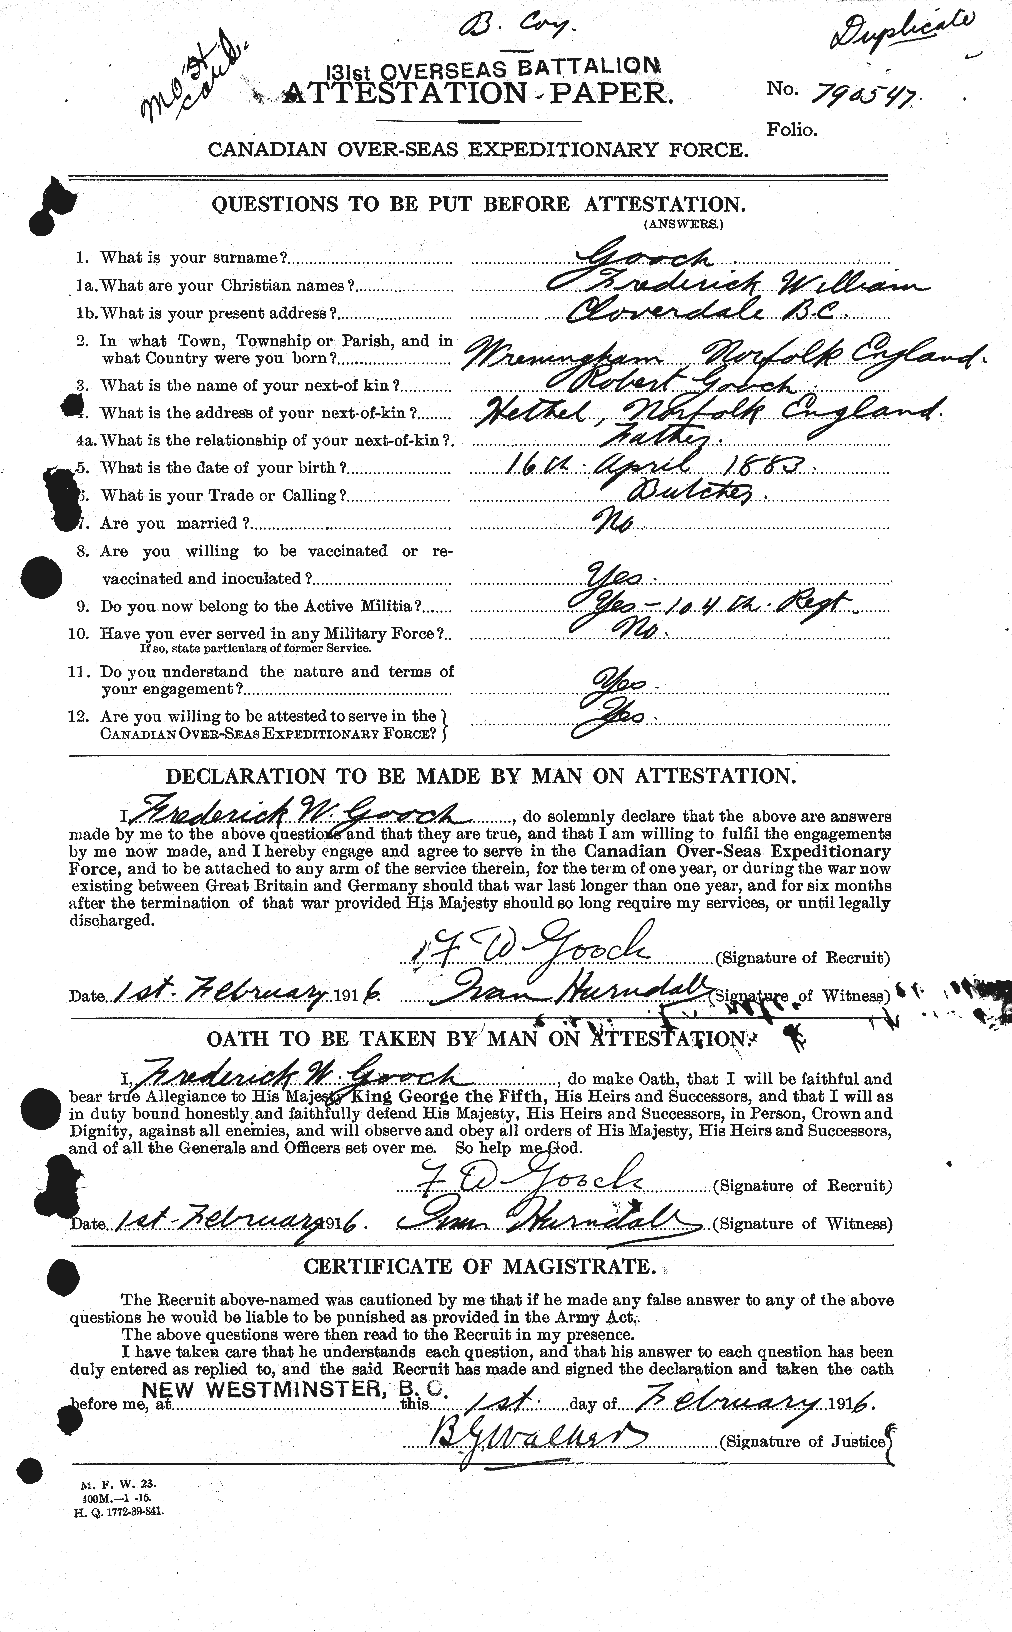 Personnel Records of the First World War - CEF 354903a